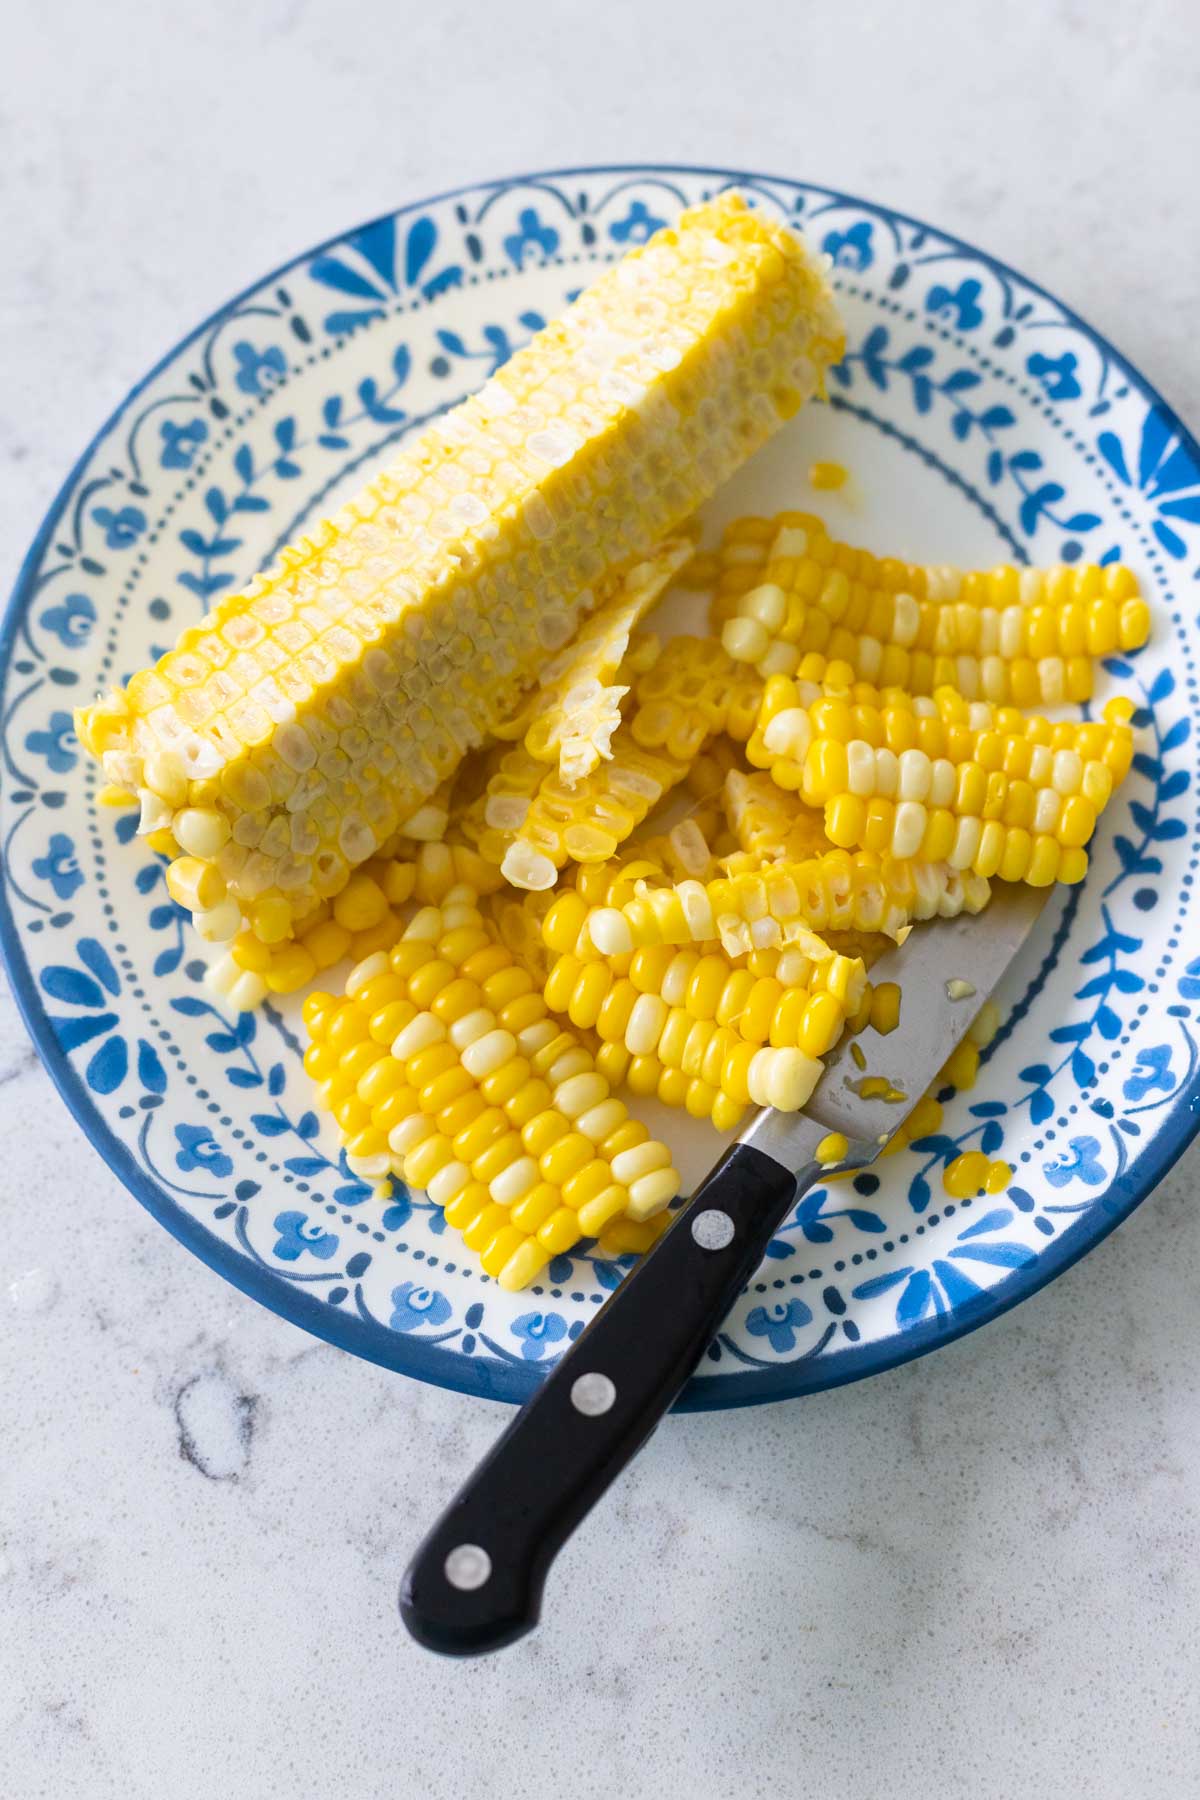 A cob of corn sits on a blue plate. A paring knife just removed all the corn kernels which rest on the plate next to the cob.